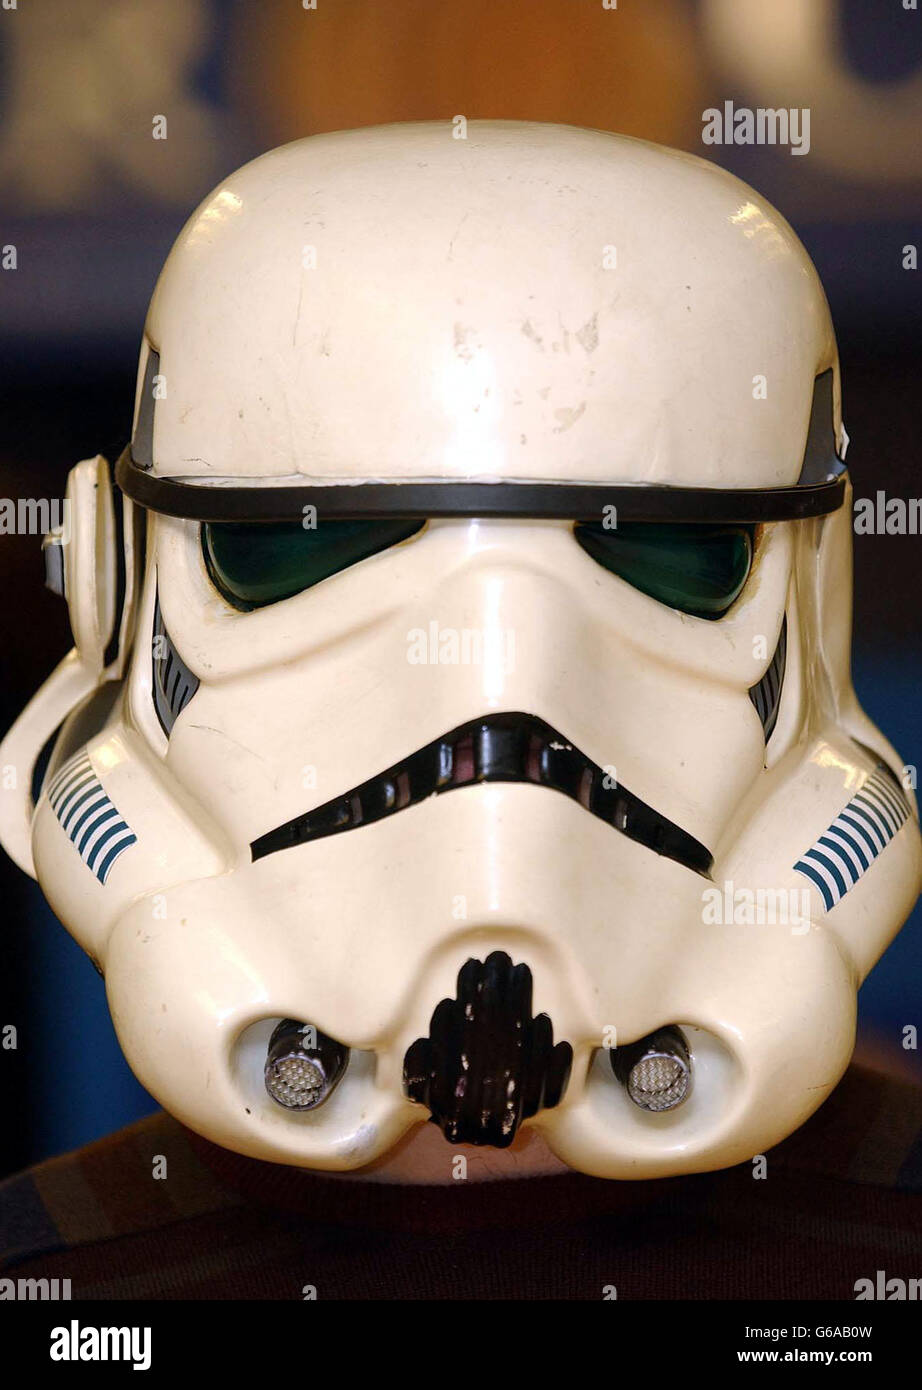 An original Stormtrooper helmet from Return of the Jedi at Cooper Owen galleries in central London The items are among 290 lots up for auction in the 'At The Movies' themed auction to be held at the Cooper and Owen galleries 10 April 2003. * The helmet is expected to fetch between 20,000 - 30,000. Stock Photo